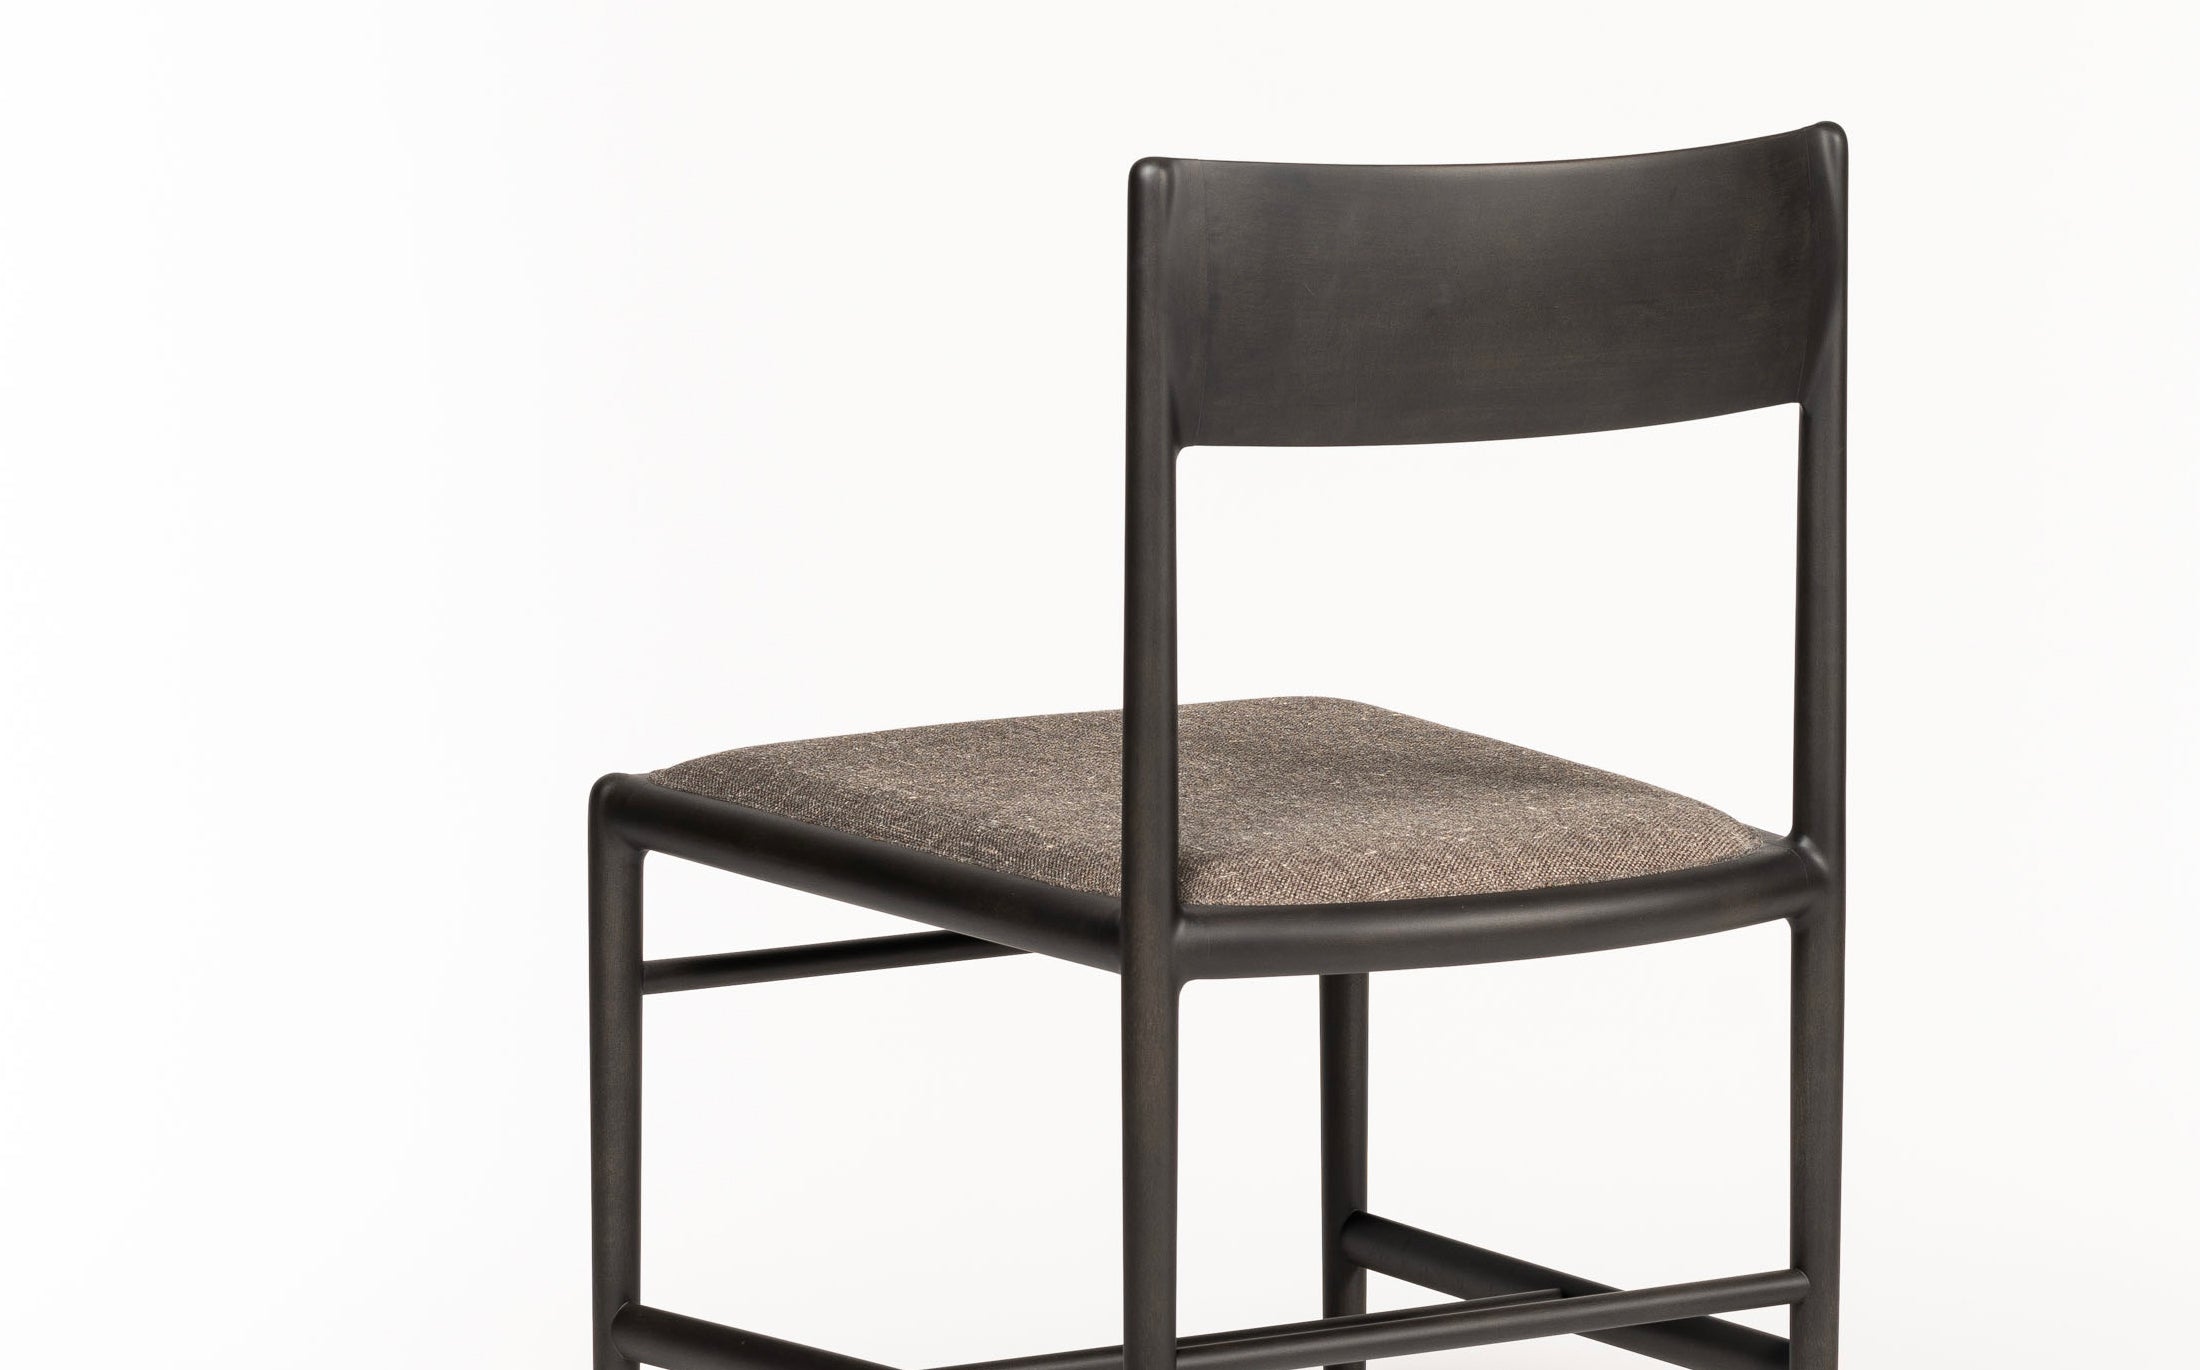 a chair on the vertical axis - sidechair - Charcoal grey